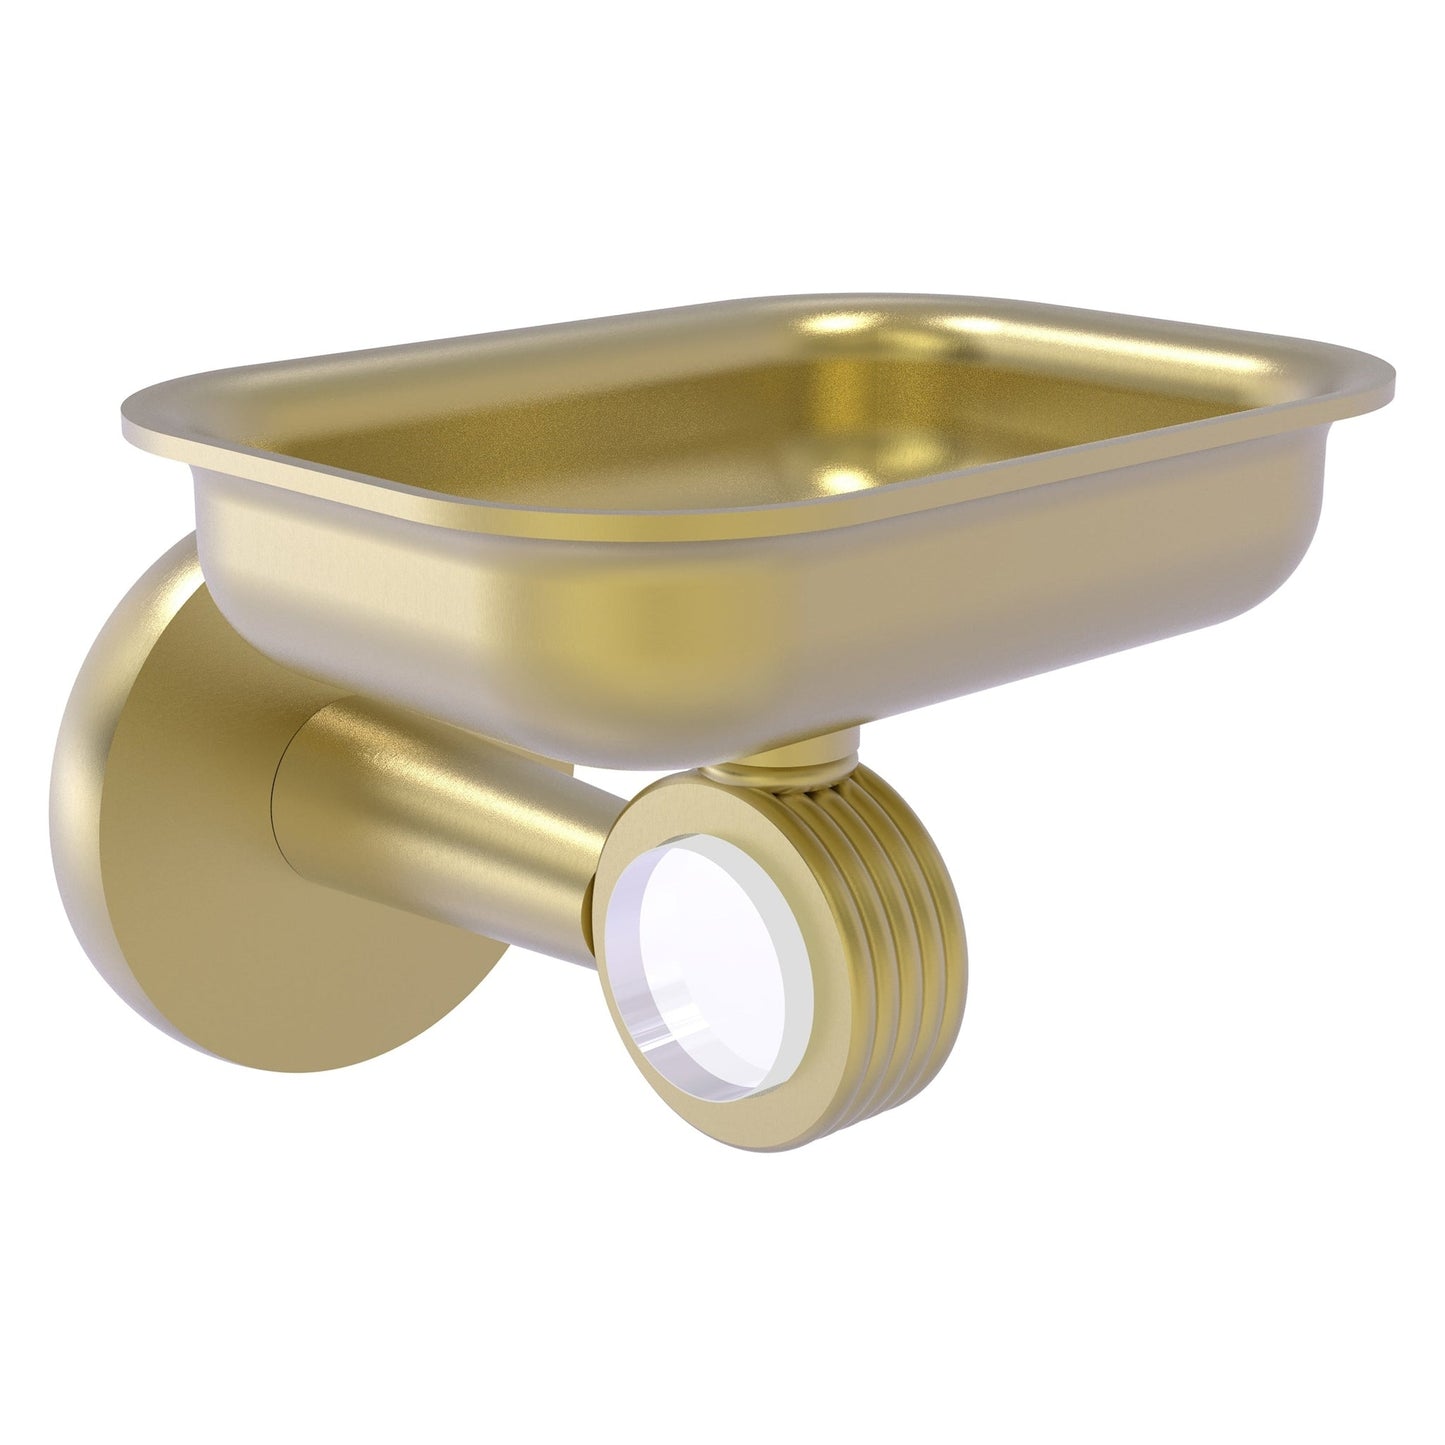 Allied Brass Clearview 4.4" x 3.6" Satin Brass Solid Brass Wall-Mounted Soap Dish Holder With Grooved Accents